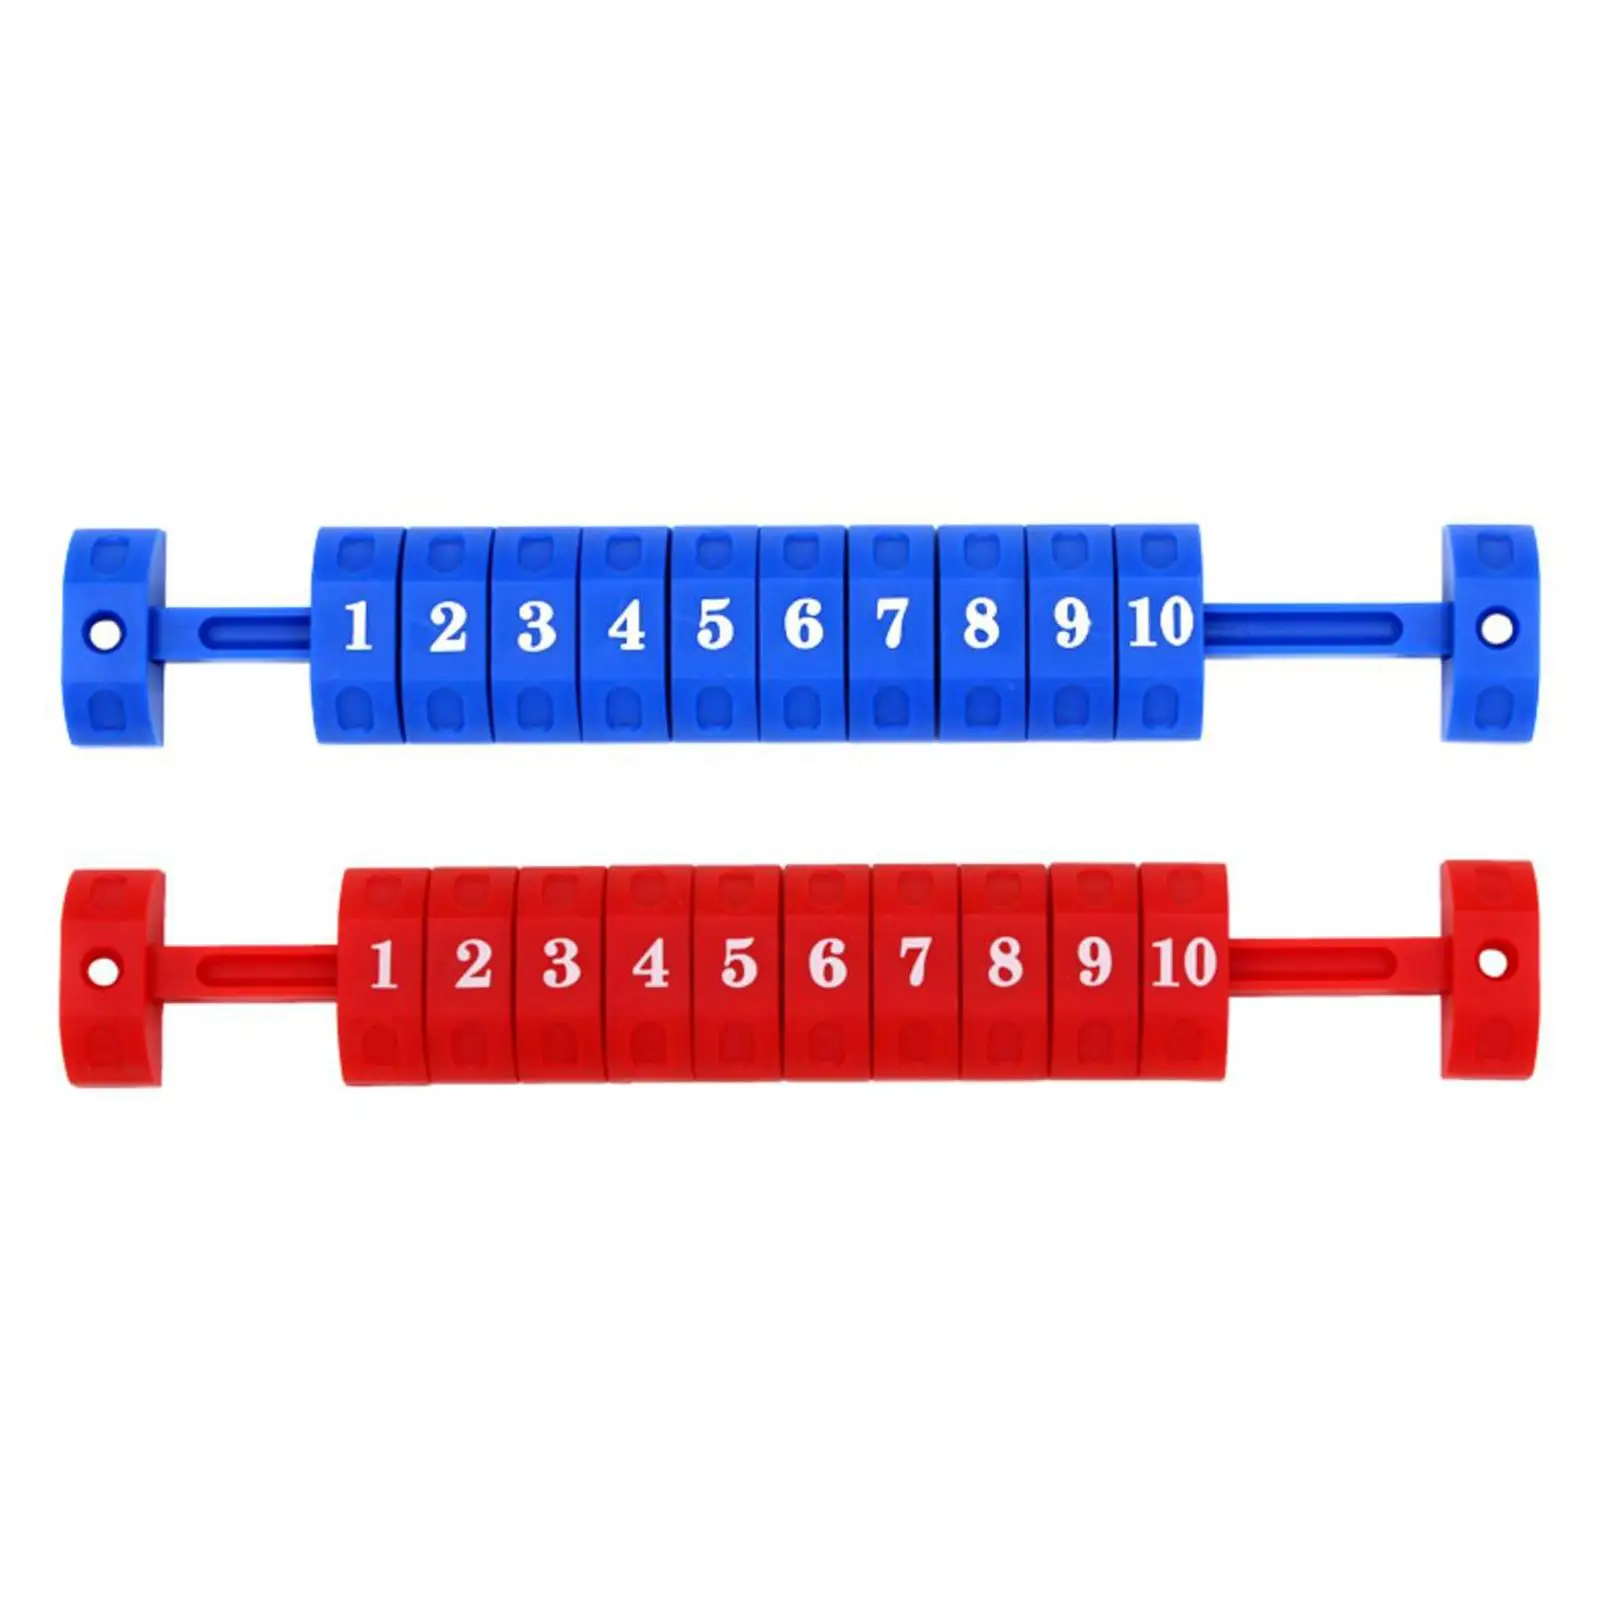 2x Universal Foosball Scoreboard Counters for Standard Table Football Parts